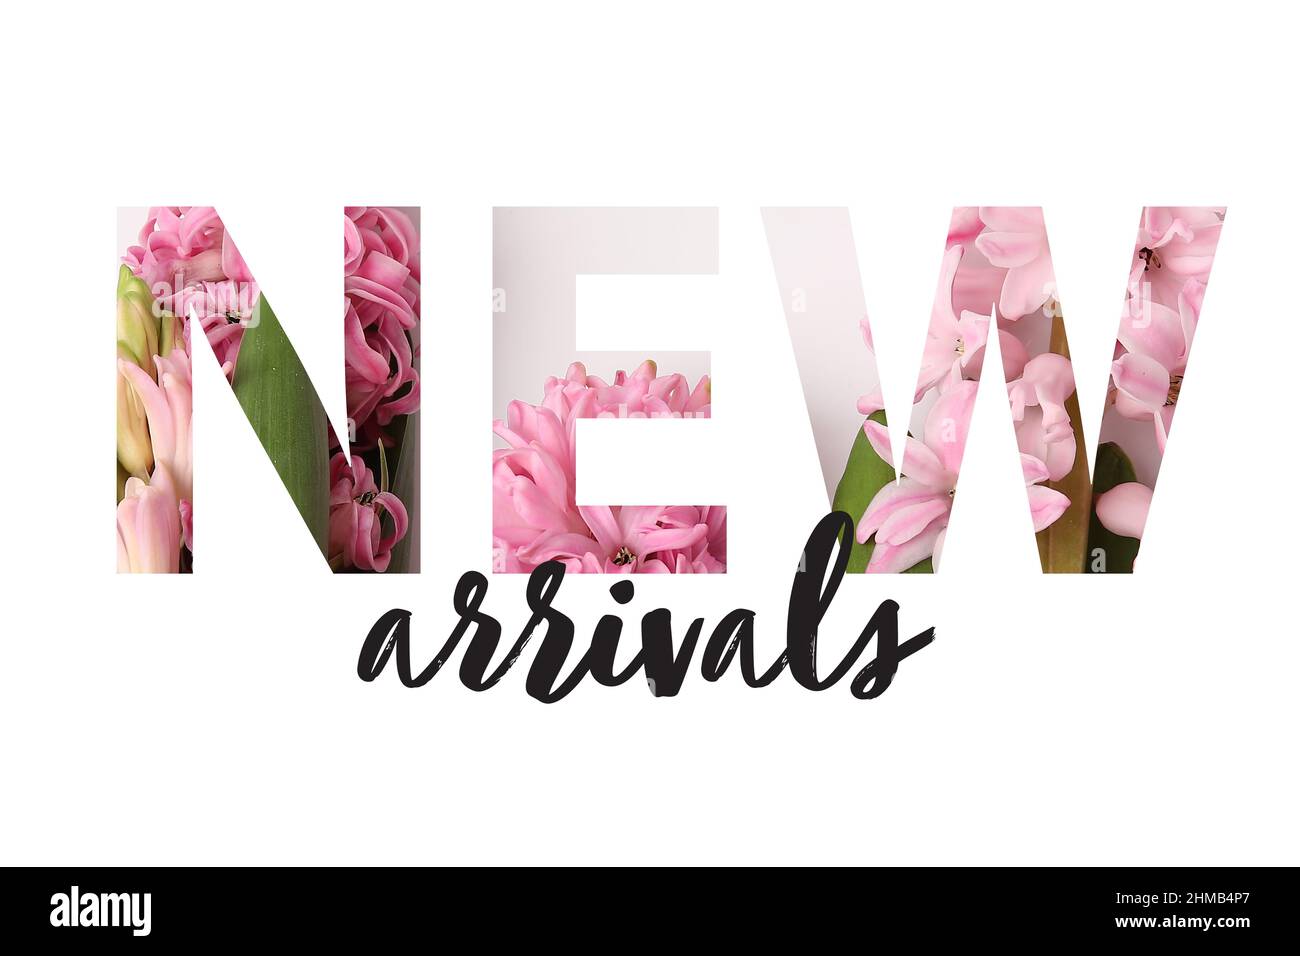 Text NEW ARRIVALS with hyacinth flowers on white background Stock Photo